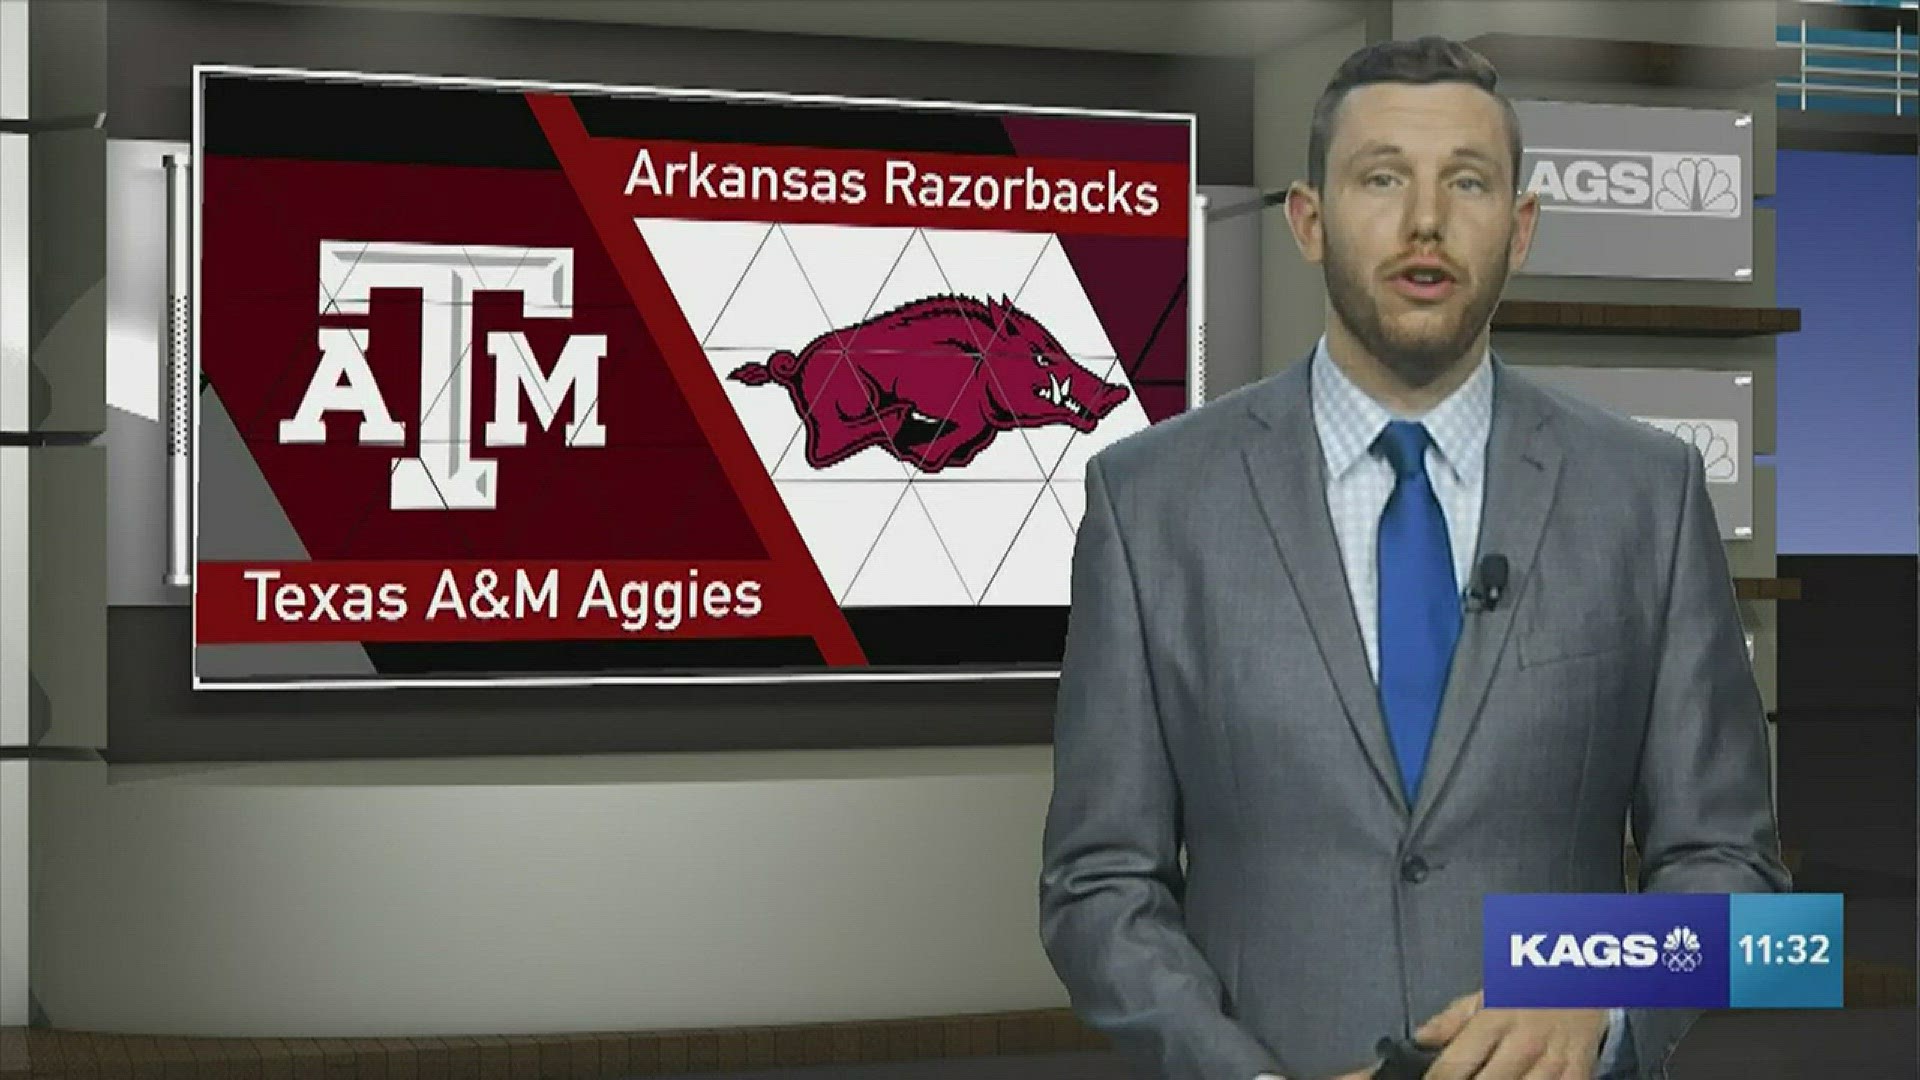 No. 17 Texas A&M defeated Arkansas 104-60 on Thursday night in its penultimate regular season game.